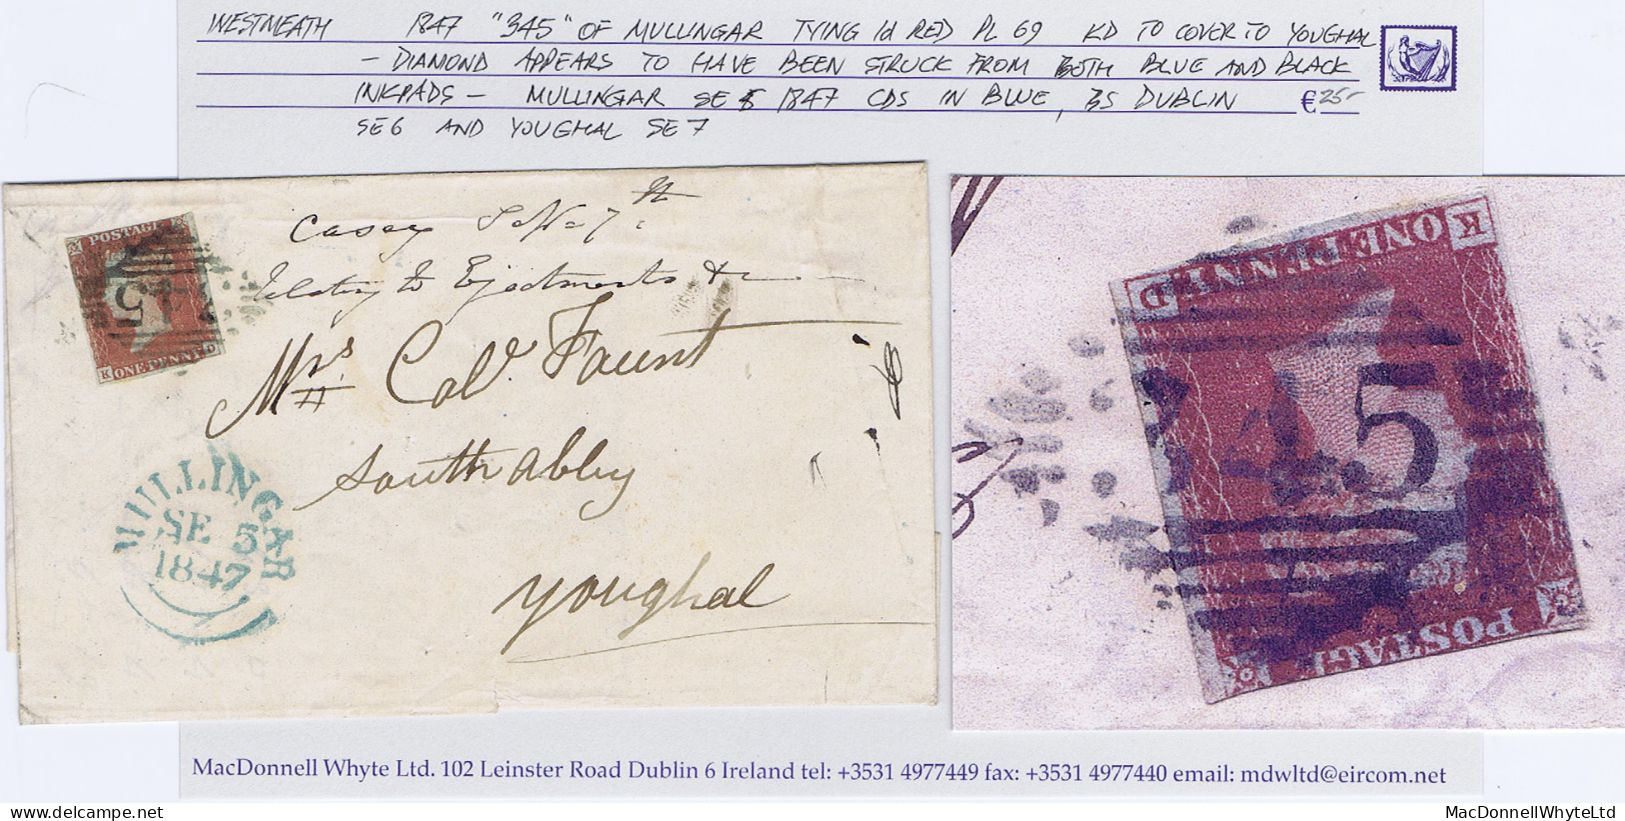 Ireland Westmeath 1847 Cover To Youghal With 1d Red Plate 69 KD Tied By "345" Of Mullingar, Green MULLINGAR SE 5 1847 Be - Vorphilatelie